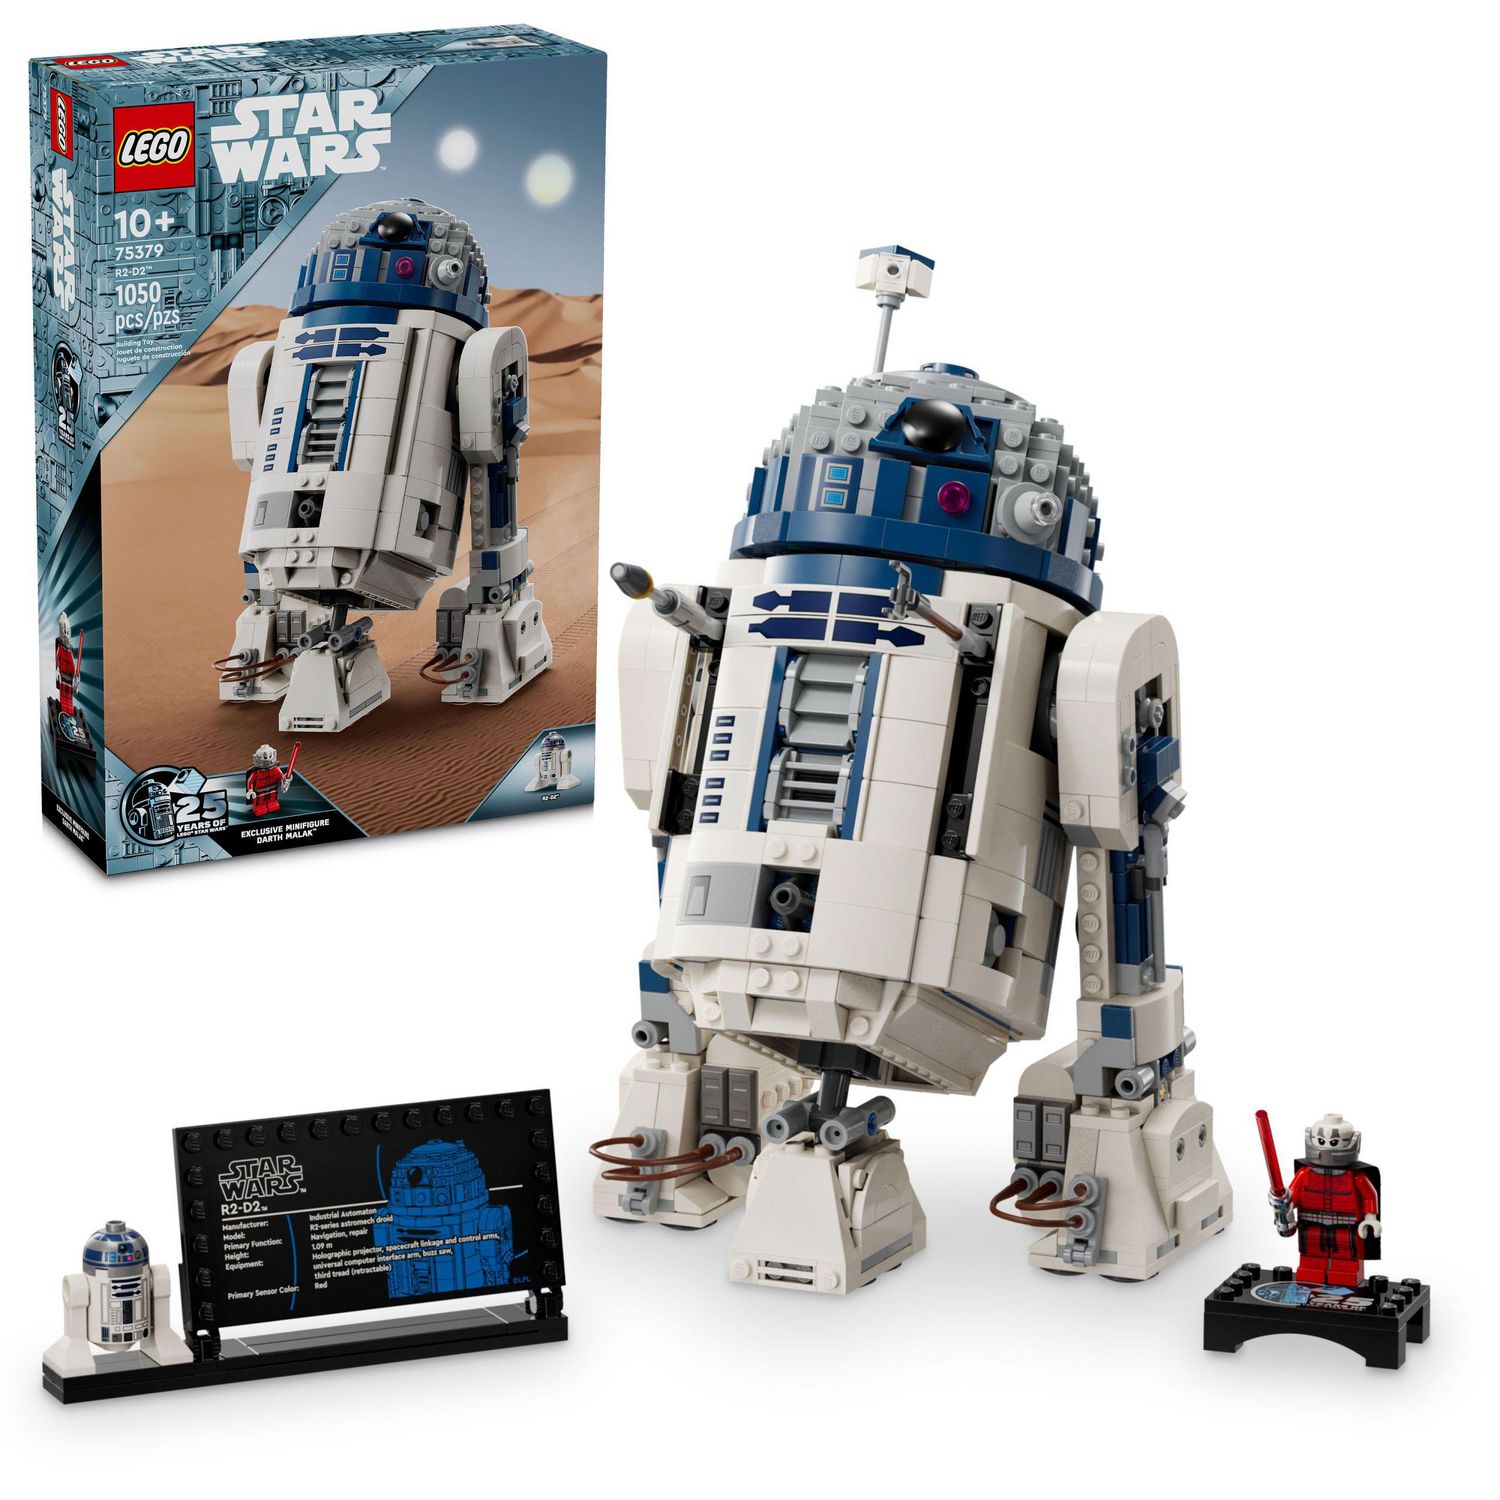 LEGO Star Wars R2-D2 Brick Built Droid Figure, Collectible May the